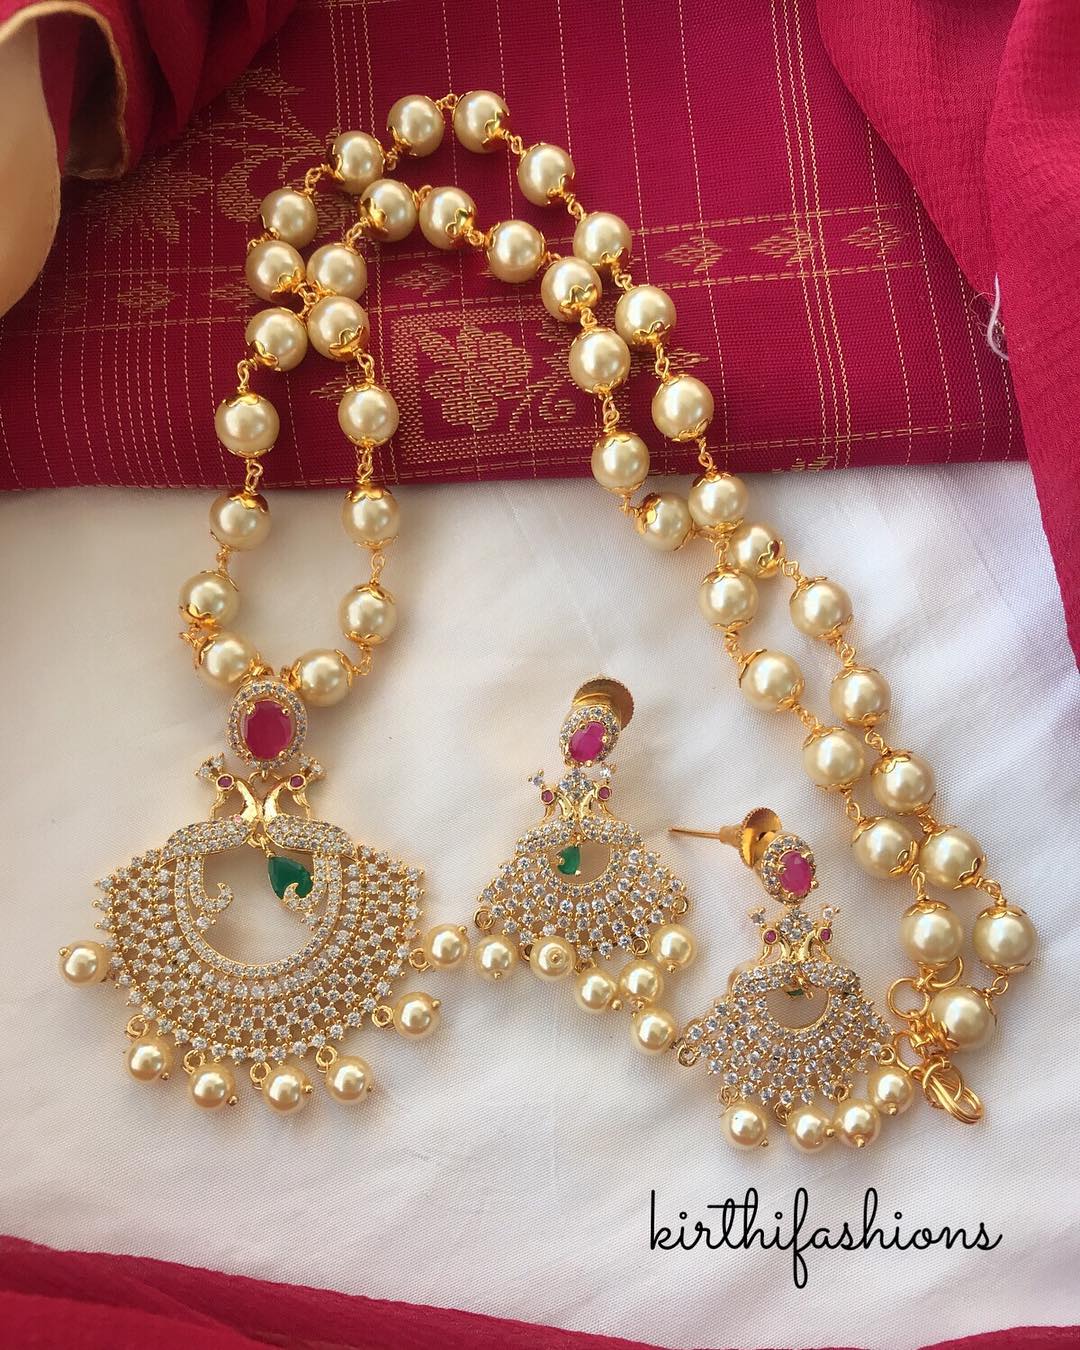 Attractive Necklace Set From Kirthi Fashions - South India Jewels